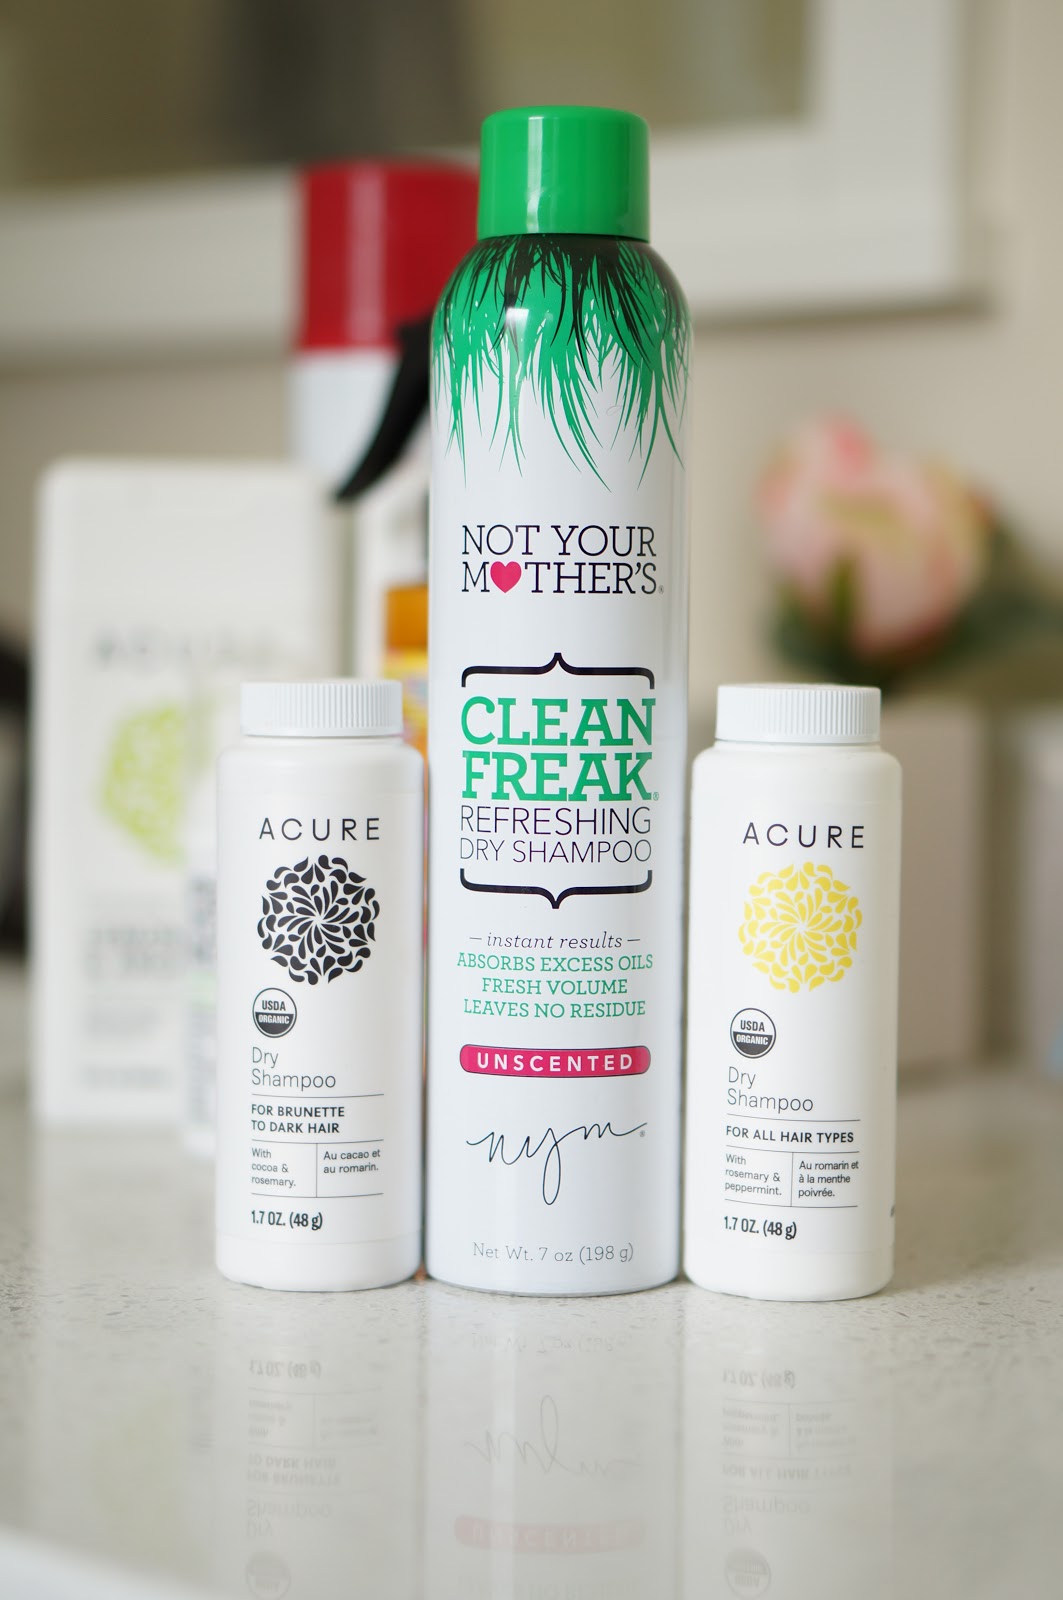 Popular North Carolina style blogger Rebecca Lately shares her cruelty free hair care routine. Check out the Acura, Amika & Yarok products that she uses!